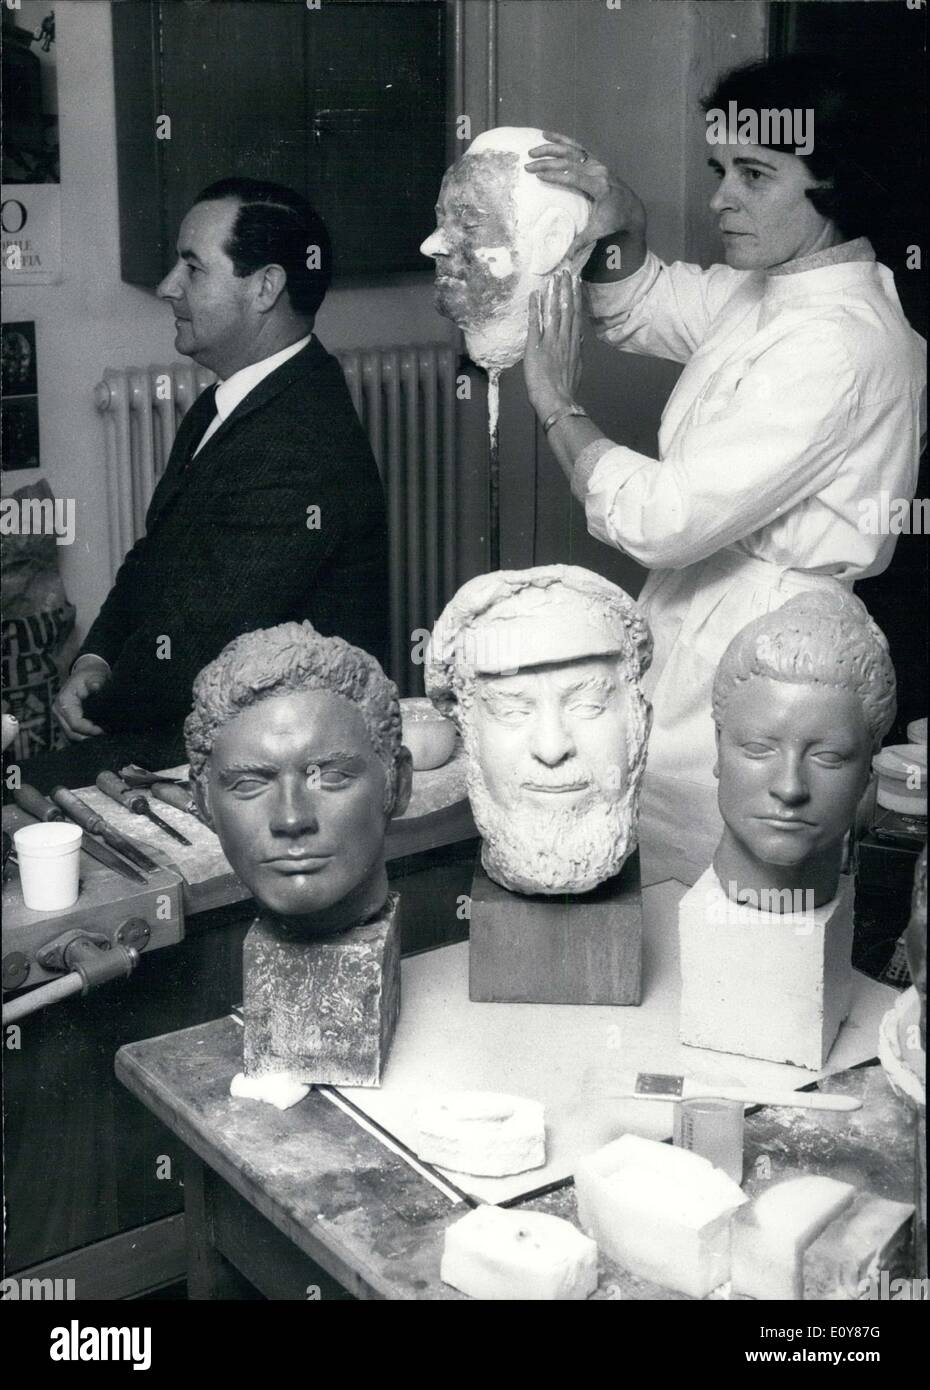 Jan. 15, 1969 - Irmtraud Gross is shown making a bust of this man sitting to her left. Stock Photo